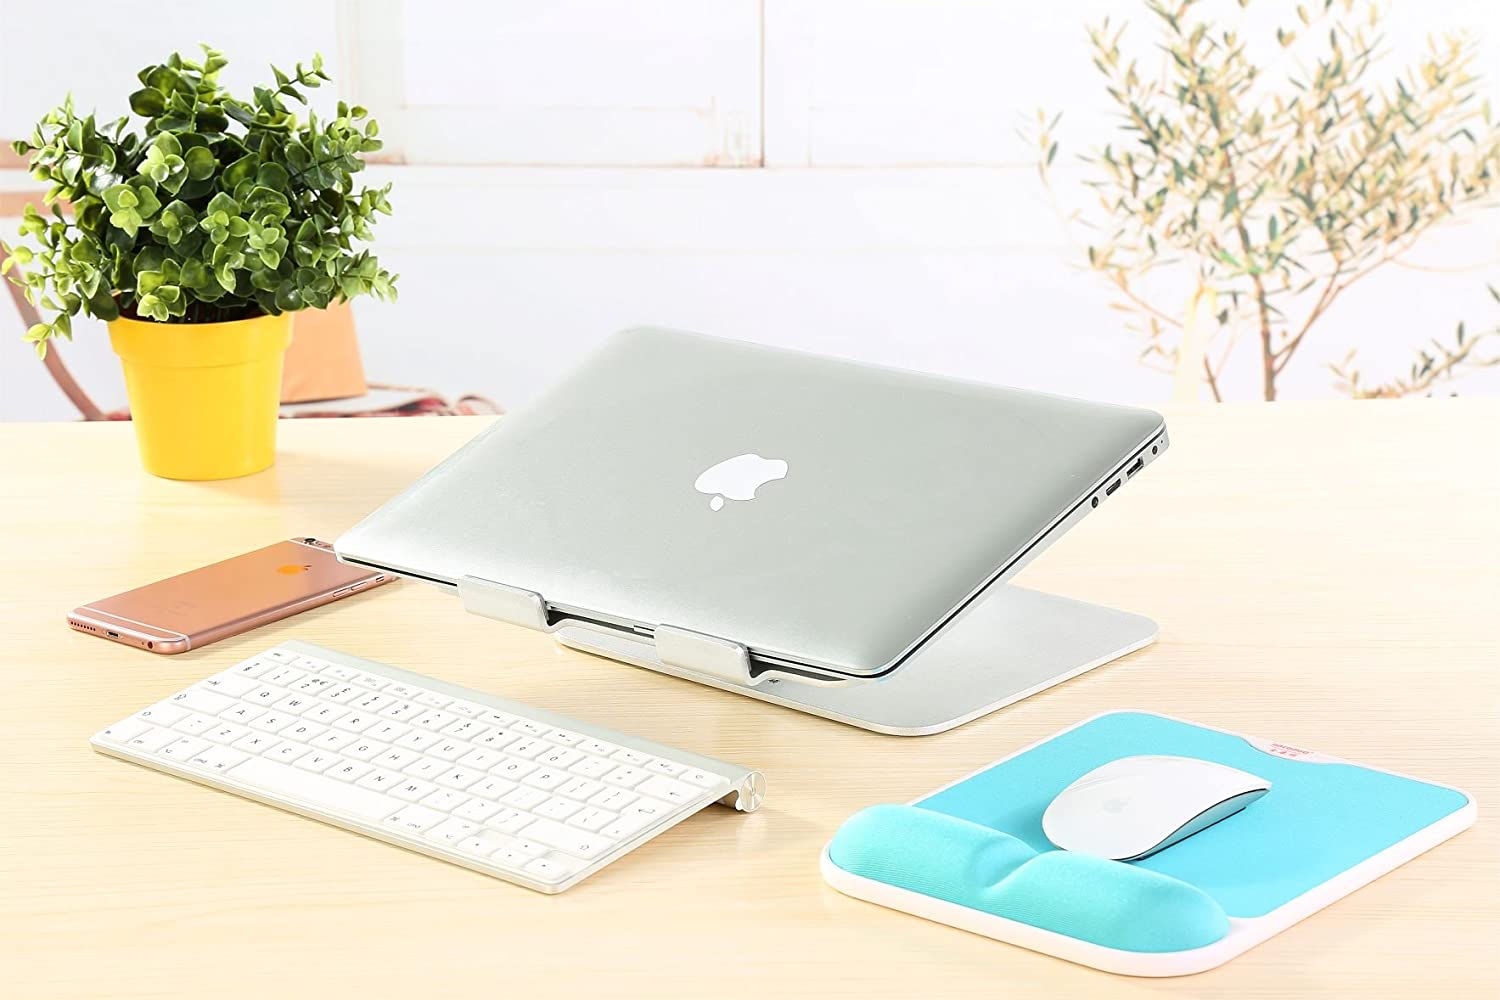 A desk with a silver aluminium laptop stand with an apple macbook placed on it. The laptop is closed.  Also on the  desk is a plant in a yellow pot, an apple iphone, a white wireless keyboard, and a white wireless mouse on a blue mouse mat. 